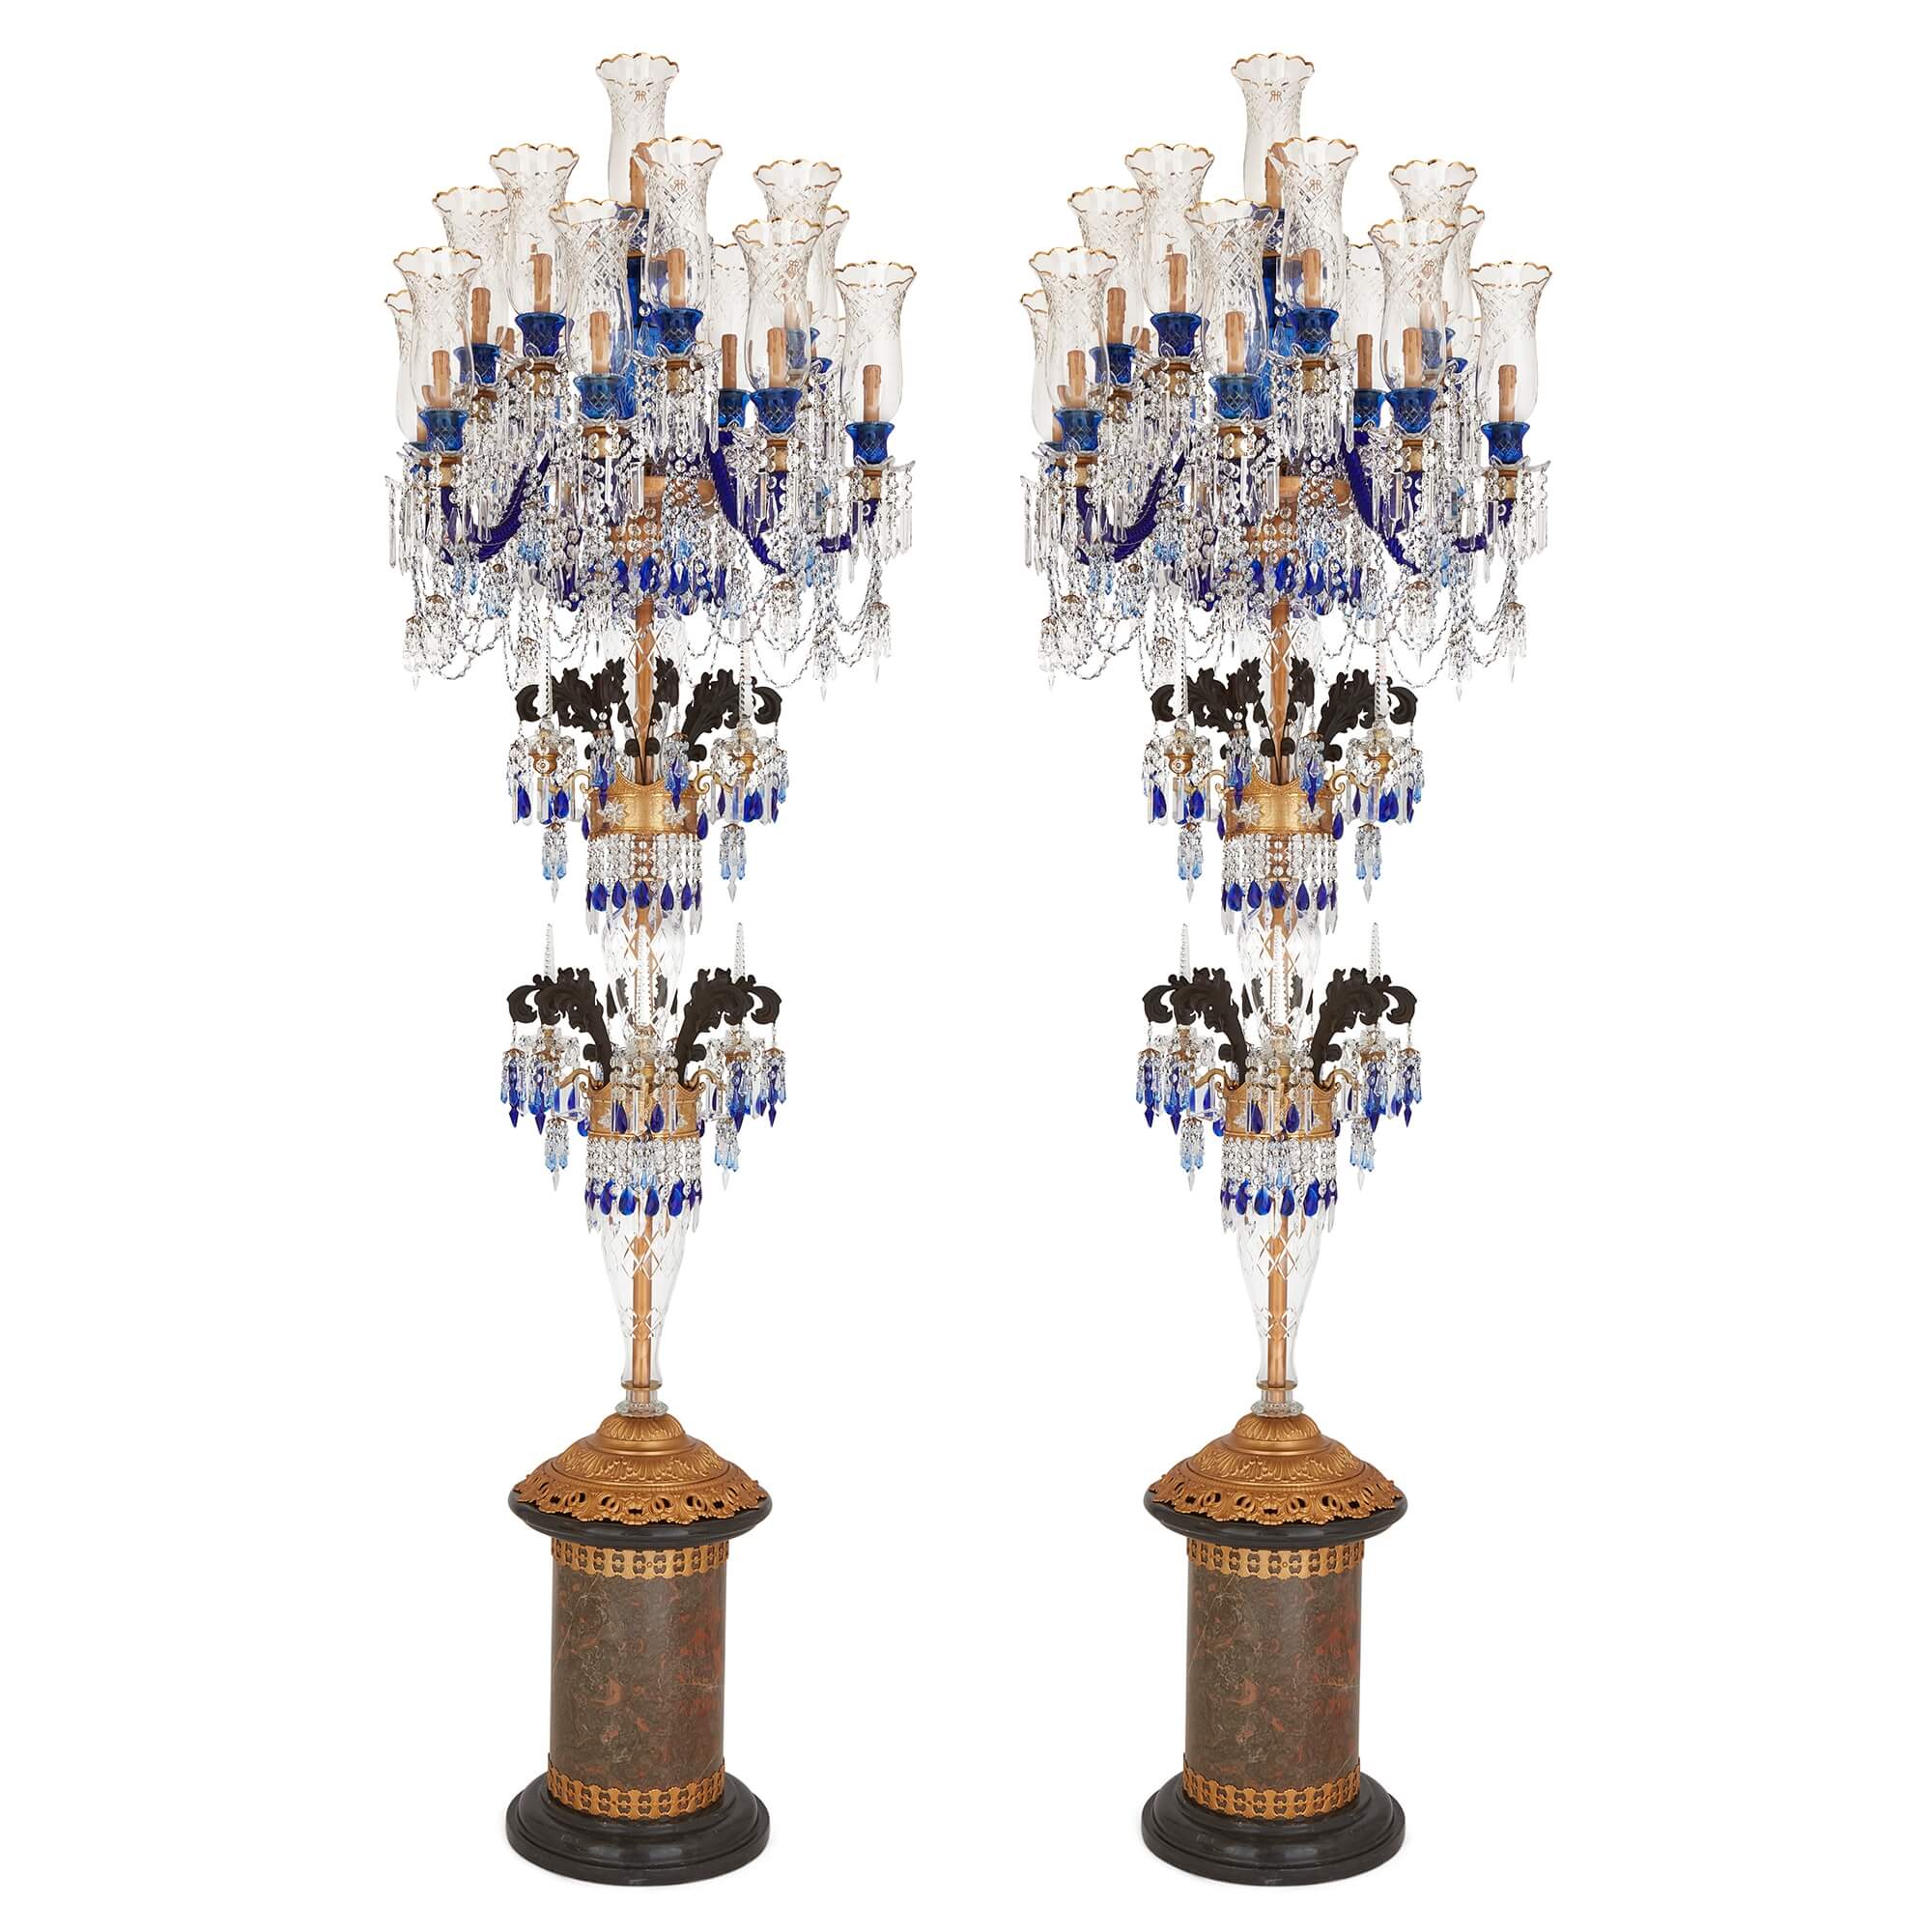 Pair of Very Large Bohemian Cut Glass, Bronze and Marble Candelabra